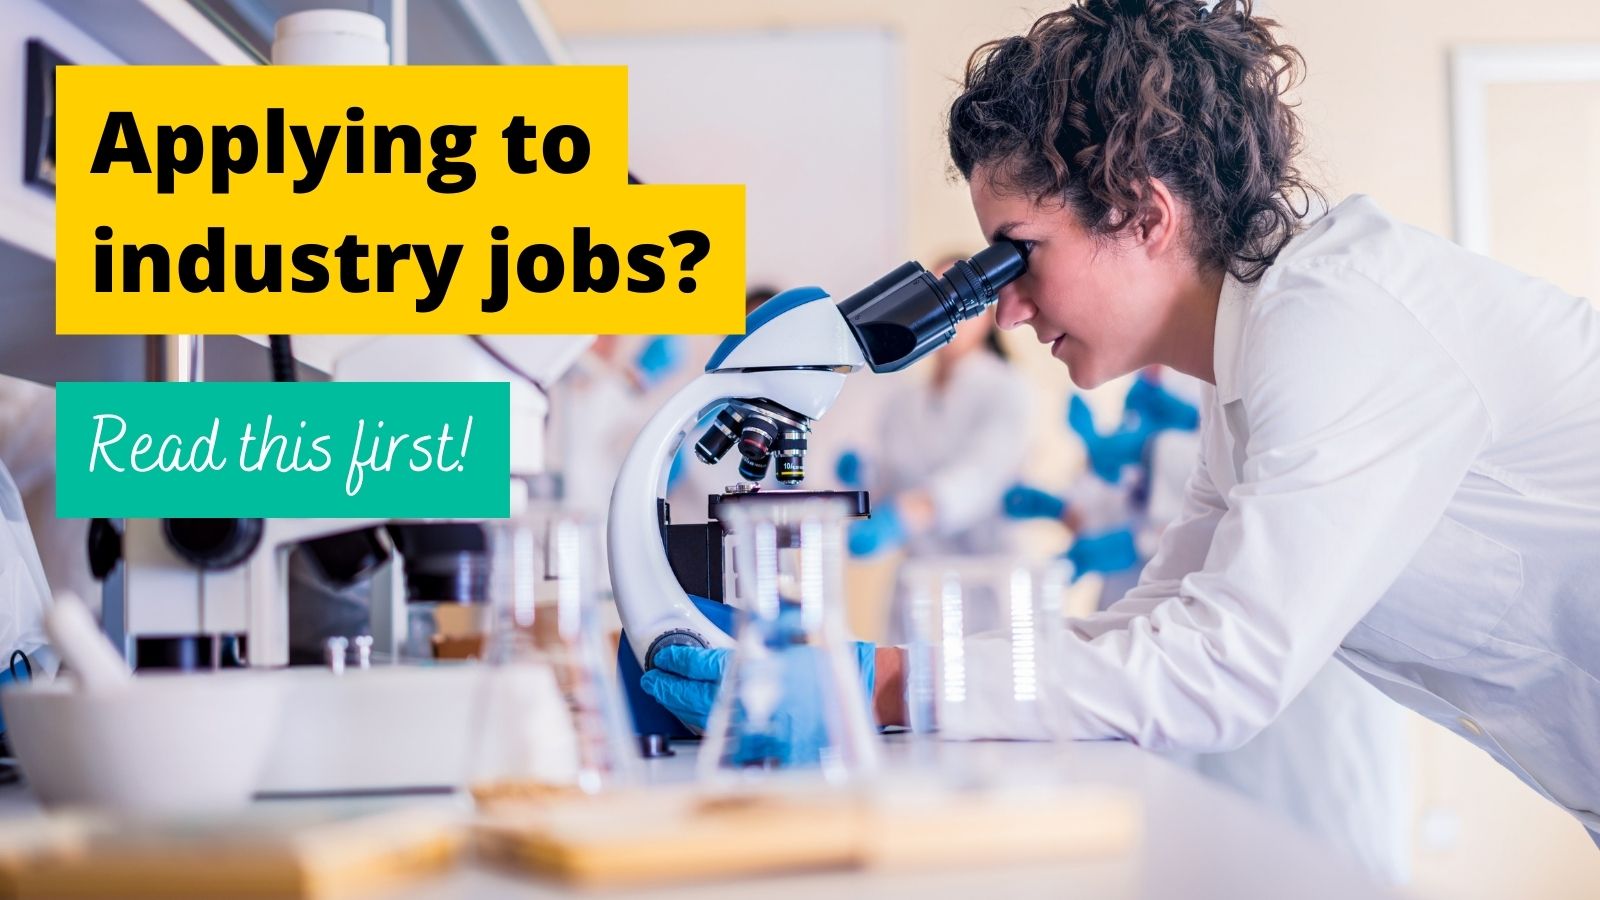 Want to apply to industry jobs for PhDs? Read this.